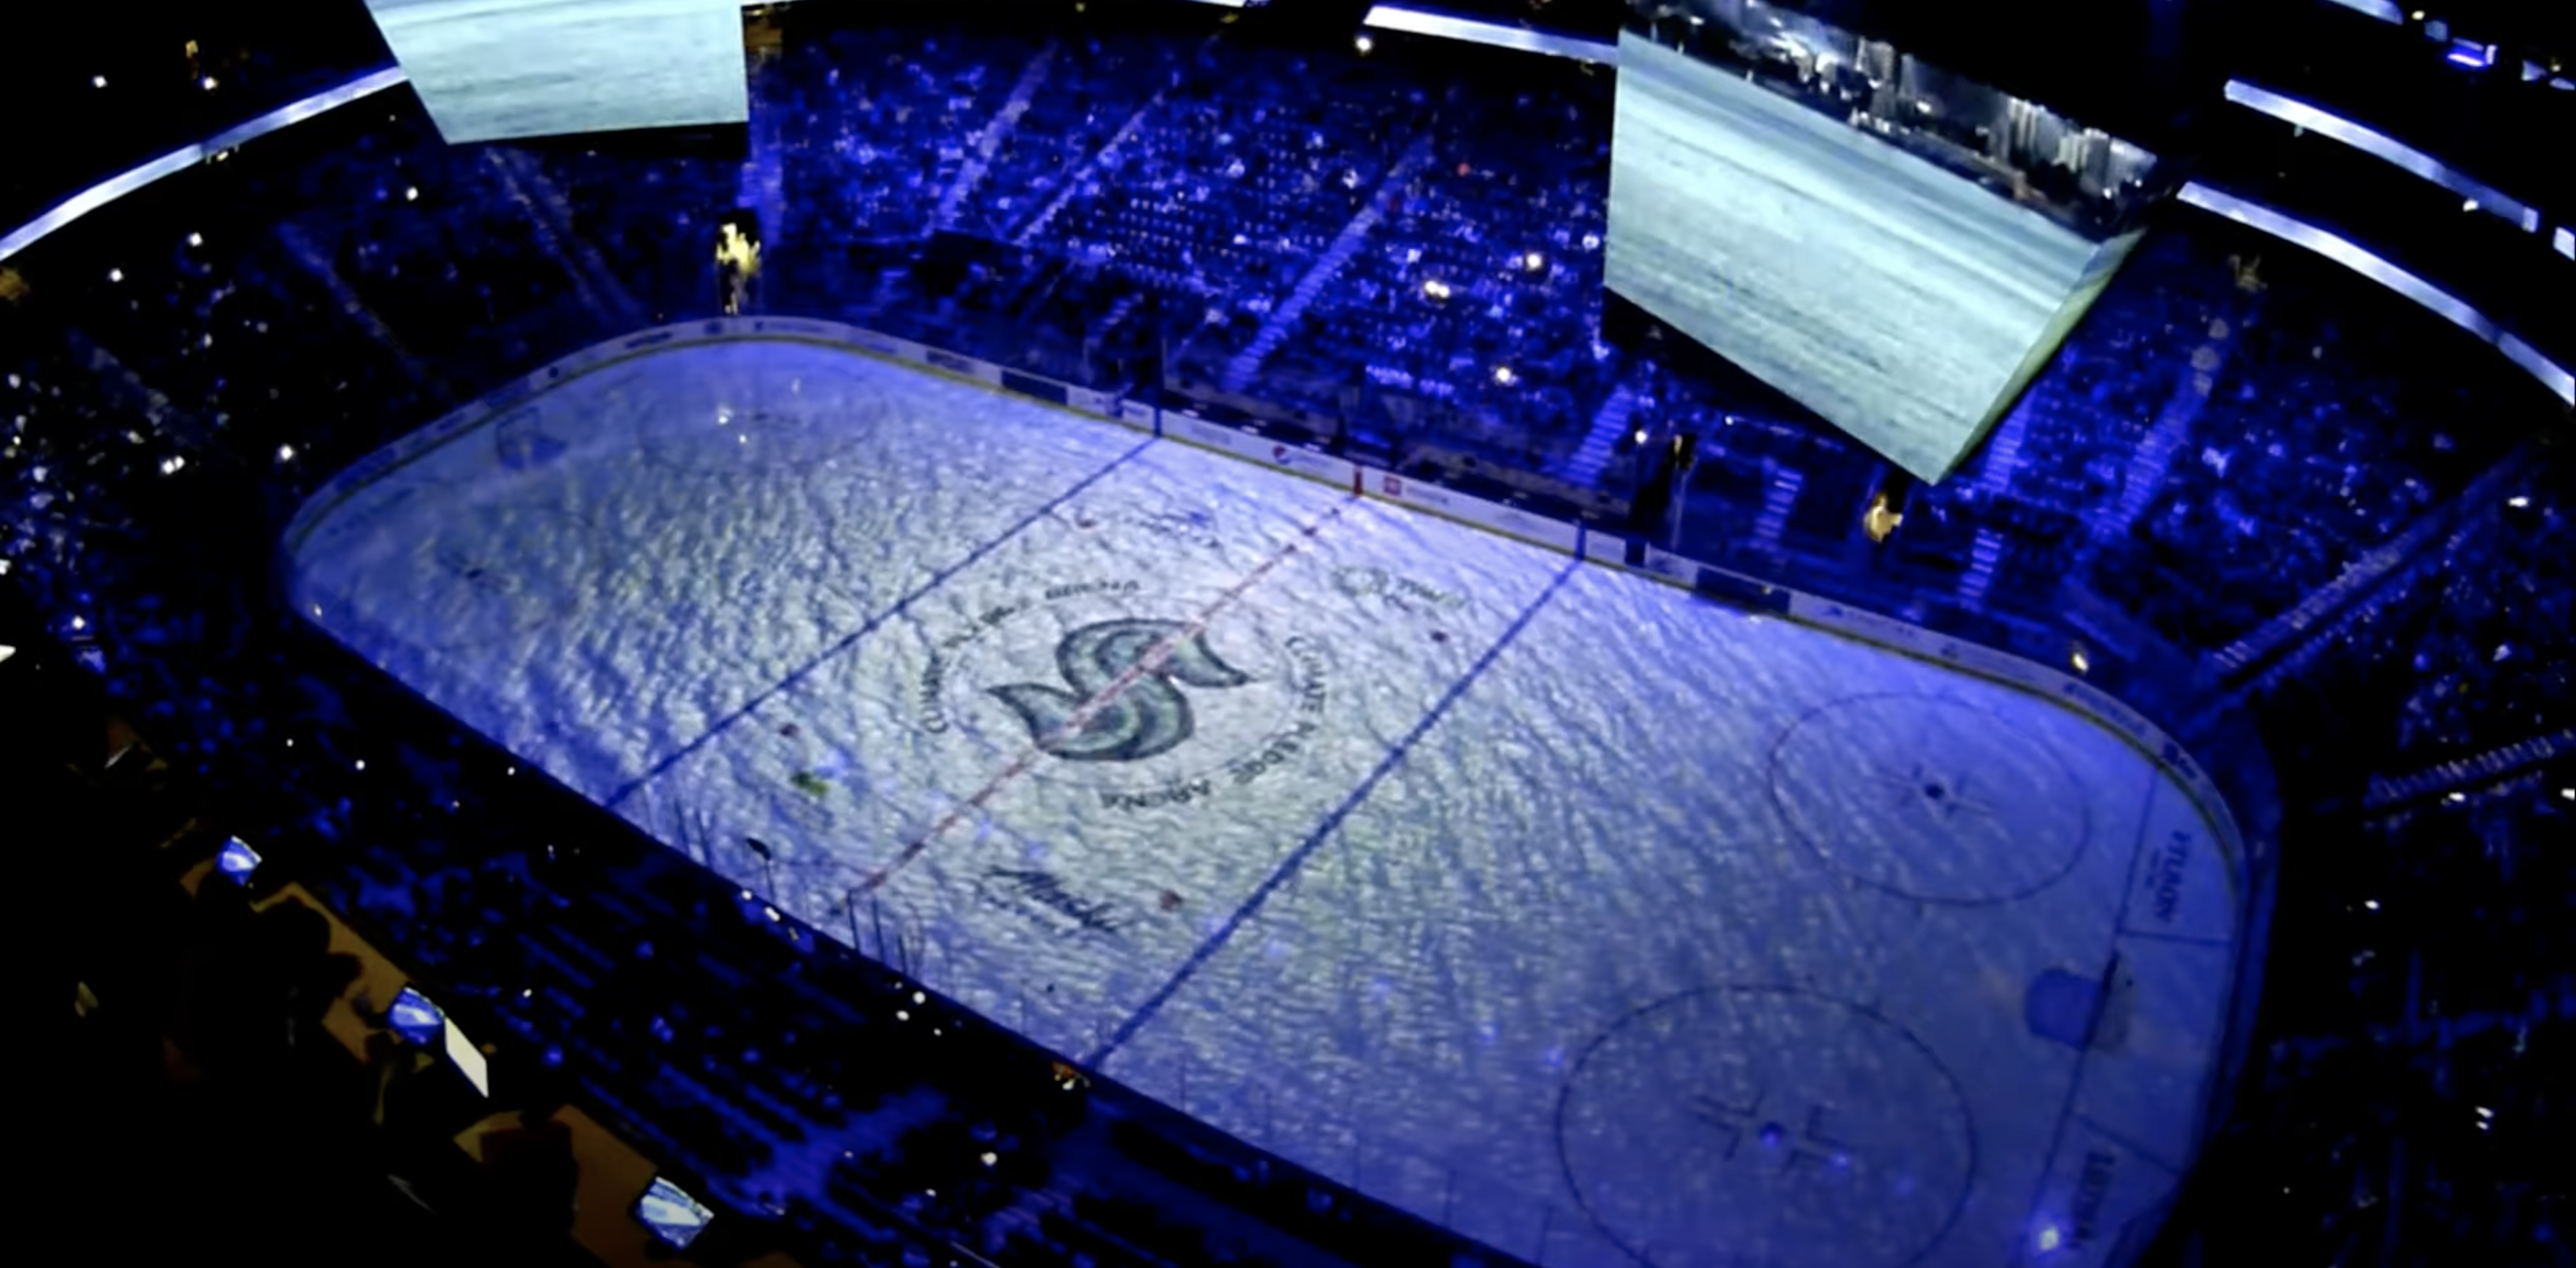 A memorable on-ice opening sequence at Seattle's technology-advanced  Climate Pledge Arena - Barco